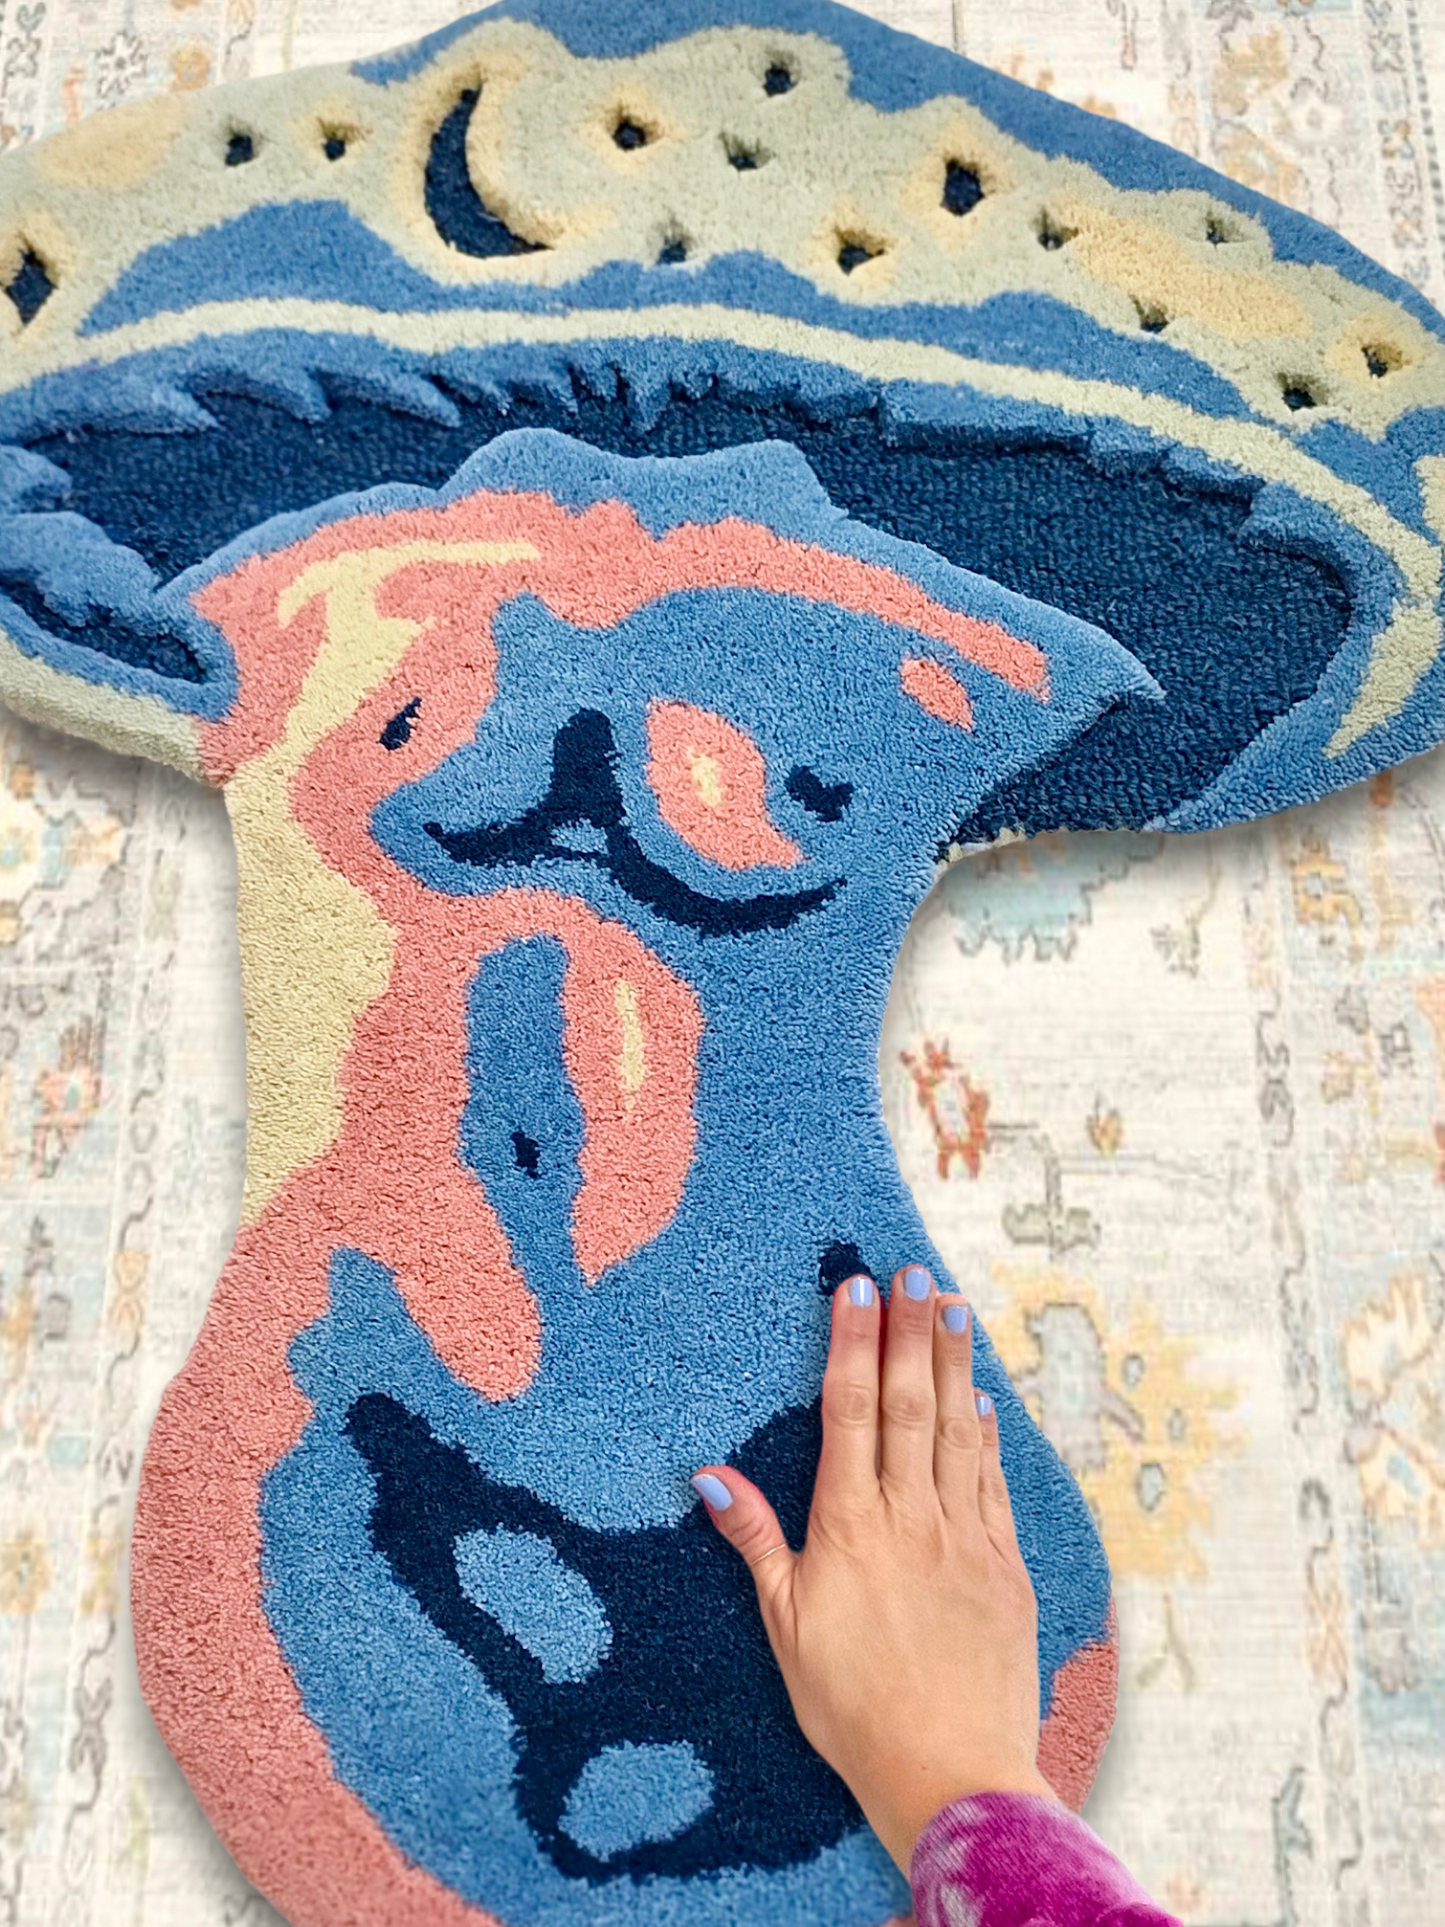 Tamara The Virgo Mushroom Lady Rug with Textured Stars by Chrissy Crater Moon Soft Goods